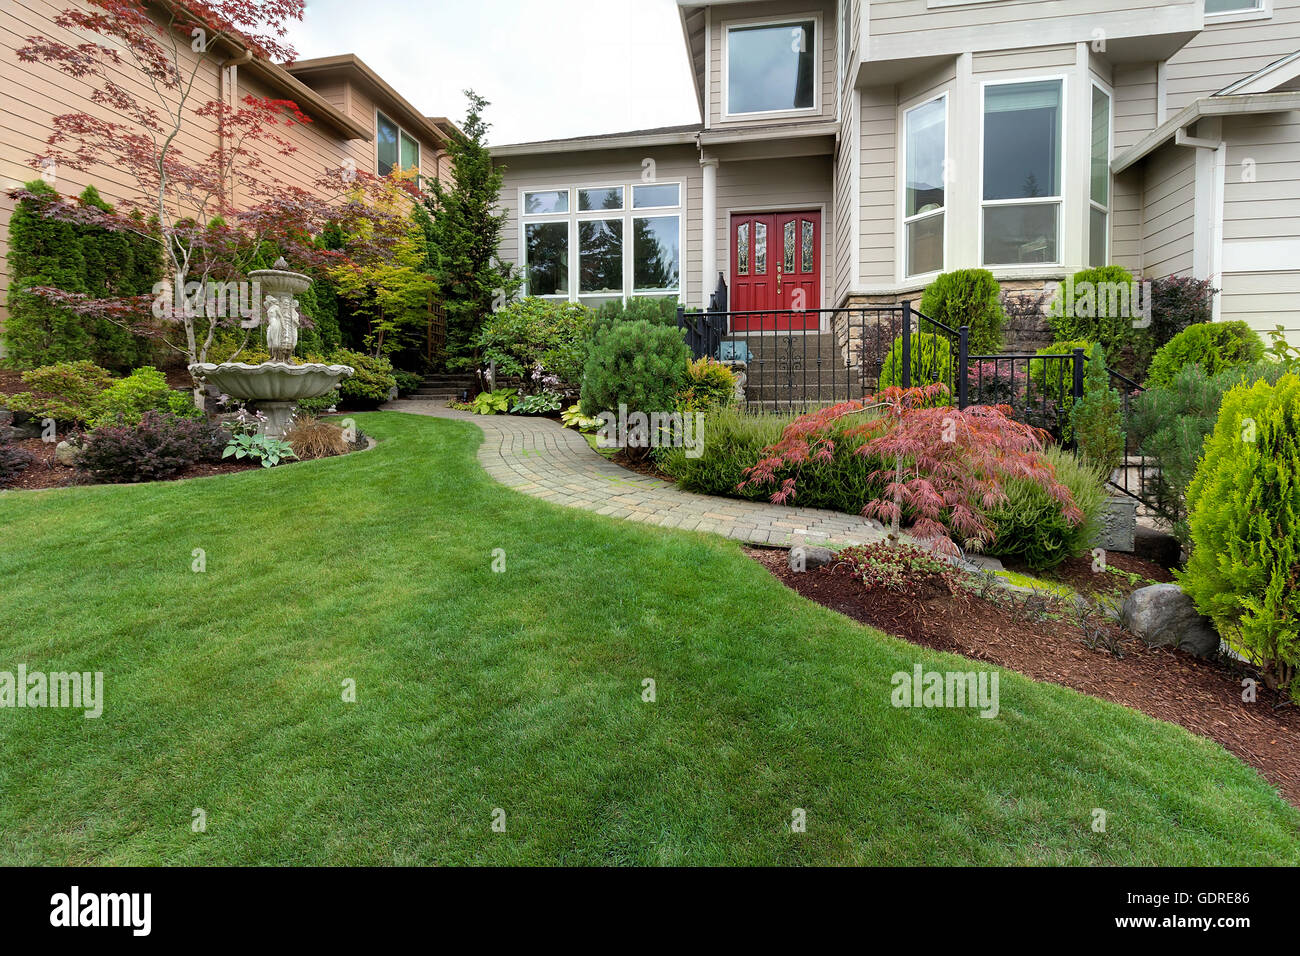 Frontyard garden of house with water fountain green grass lawn paver brick path trees and shrubs landscaping Stock Photo